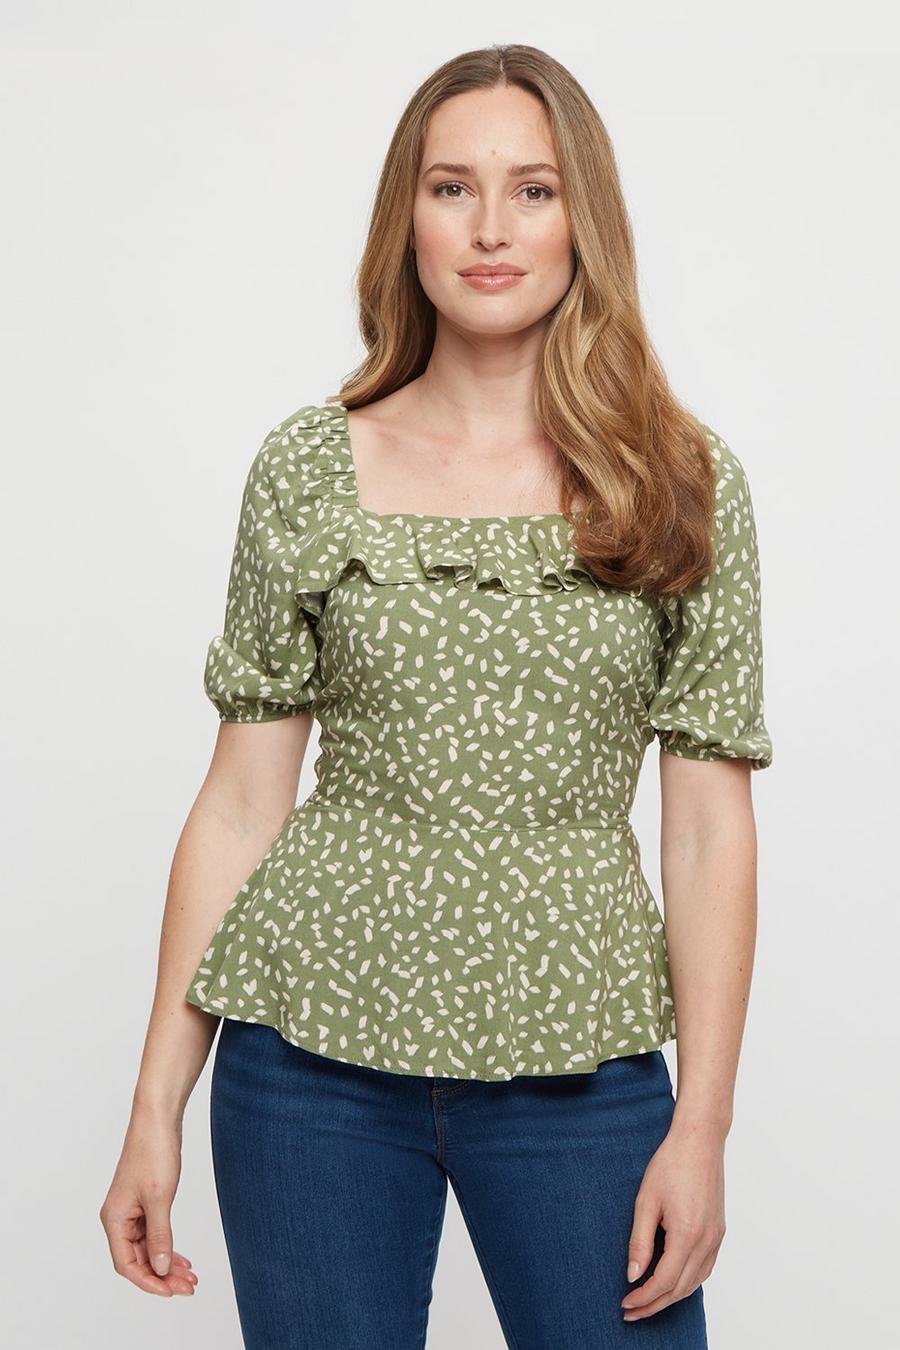 Green Abstract Print Square Neck Peplum Top